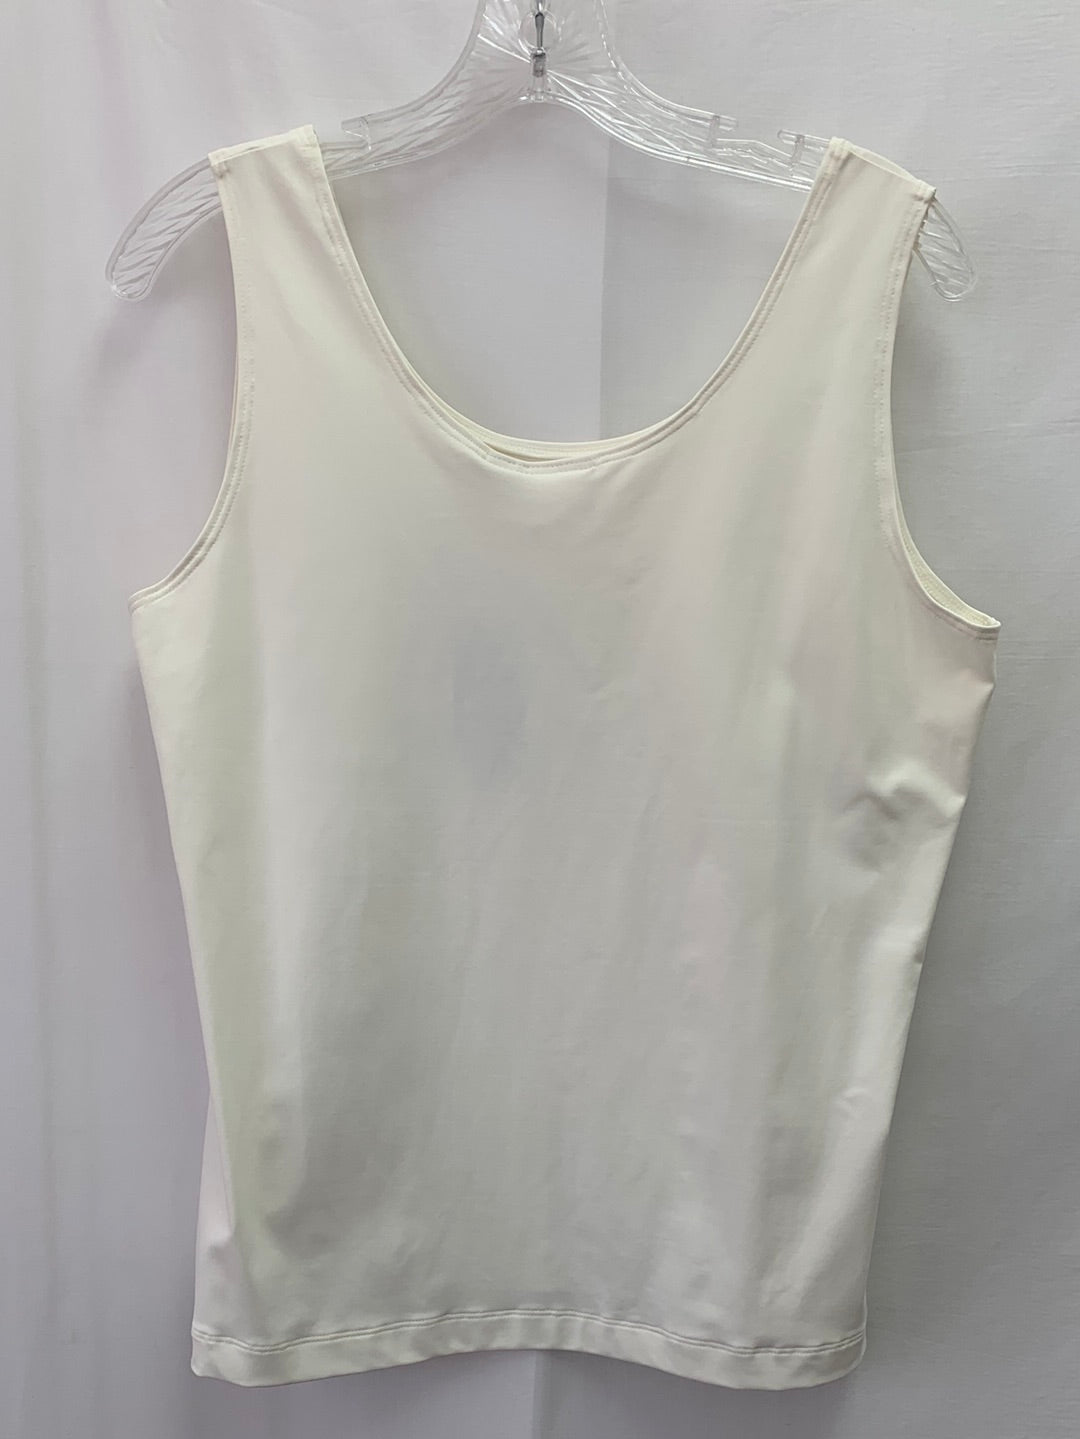 NWT - CHICO'S ivory Contemporary Basic Knit Tank Top - 2 (L 12/14)